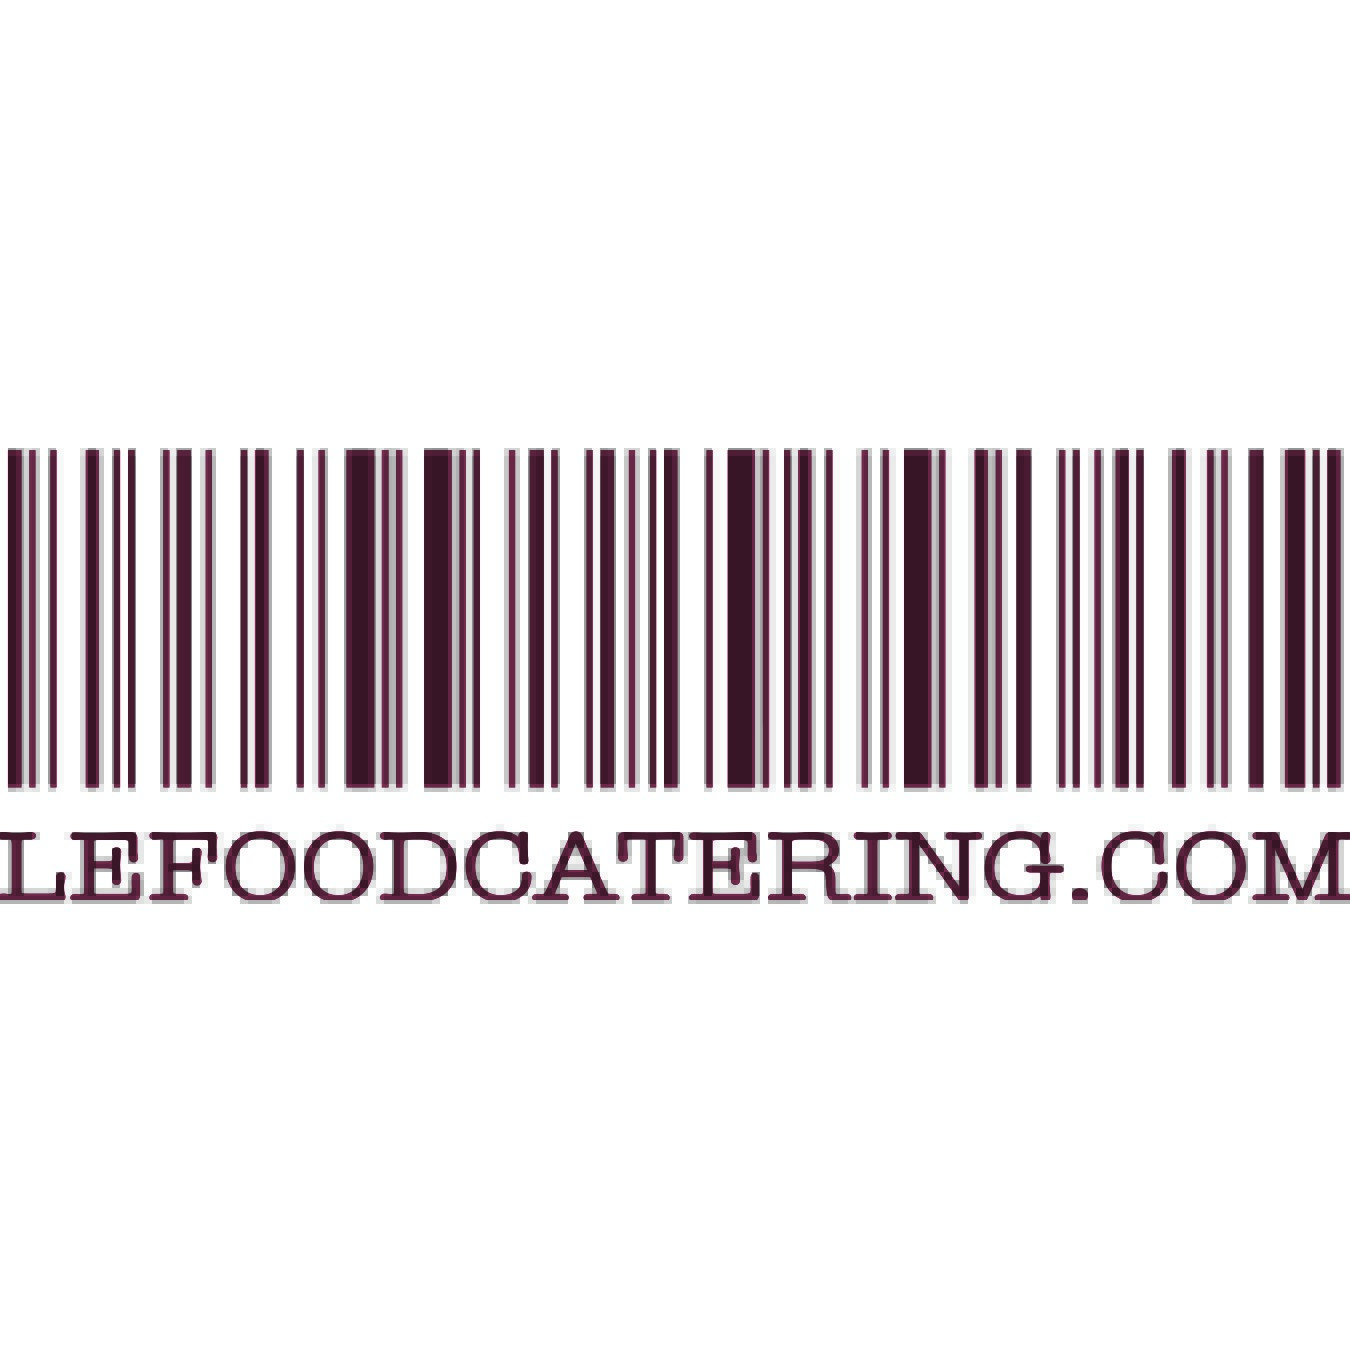 Le Food Catering